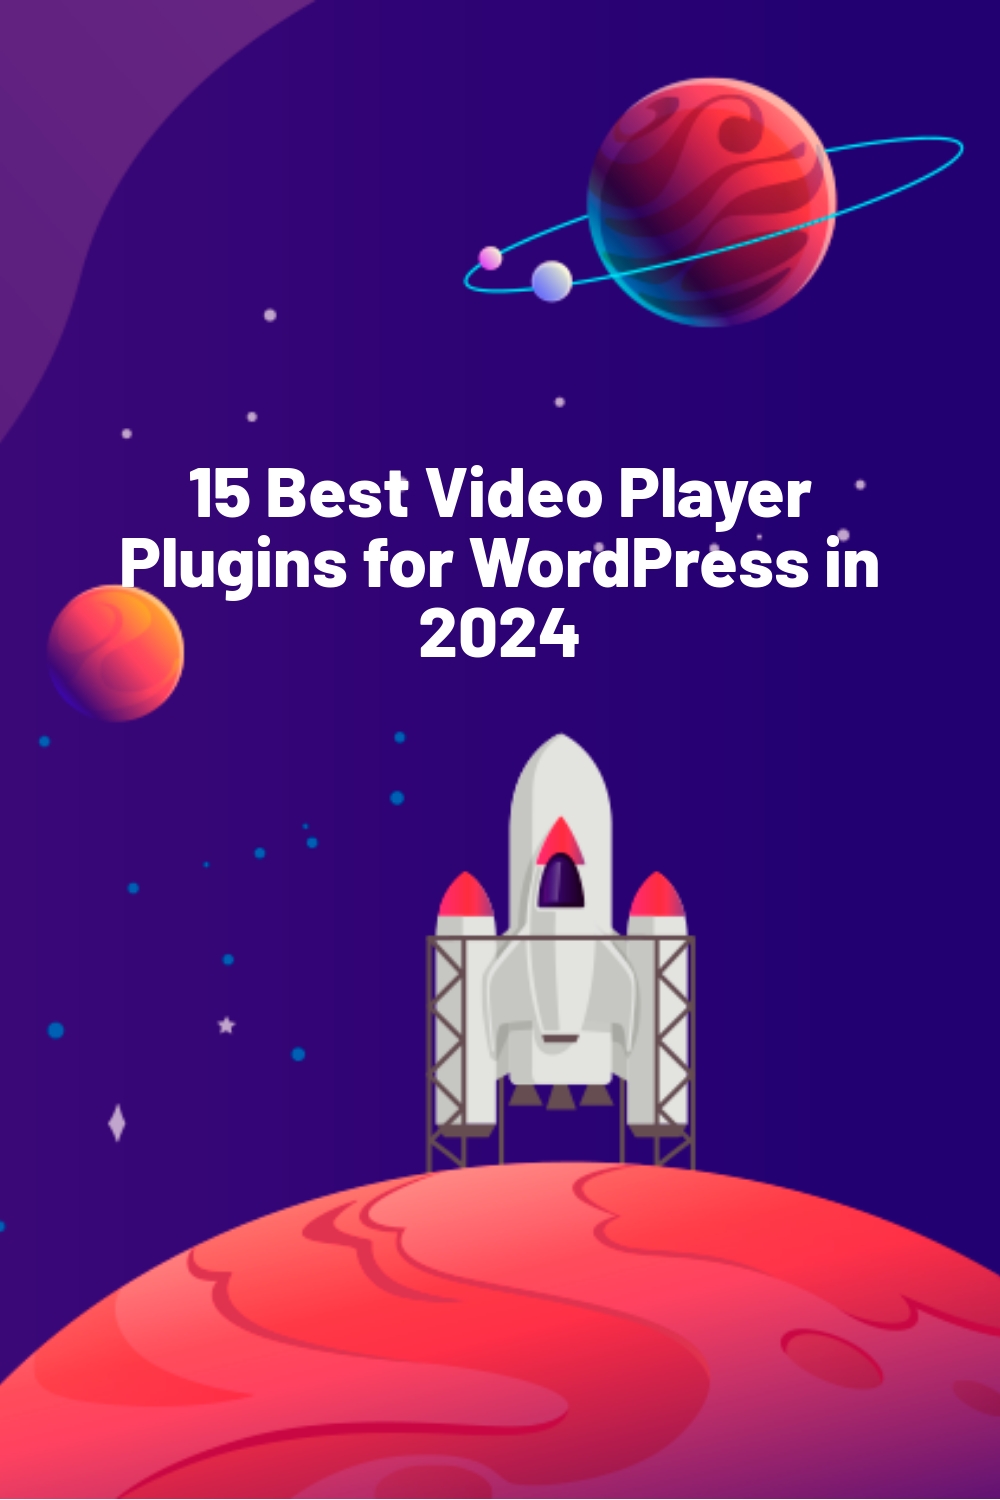 15 Best Video Player Plugins for WordPress in 2024